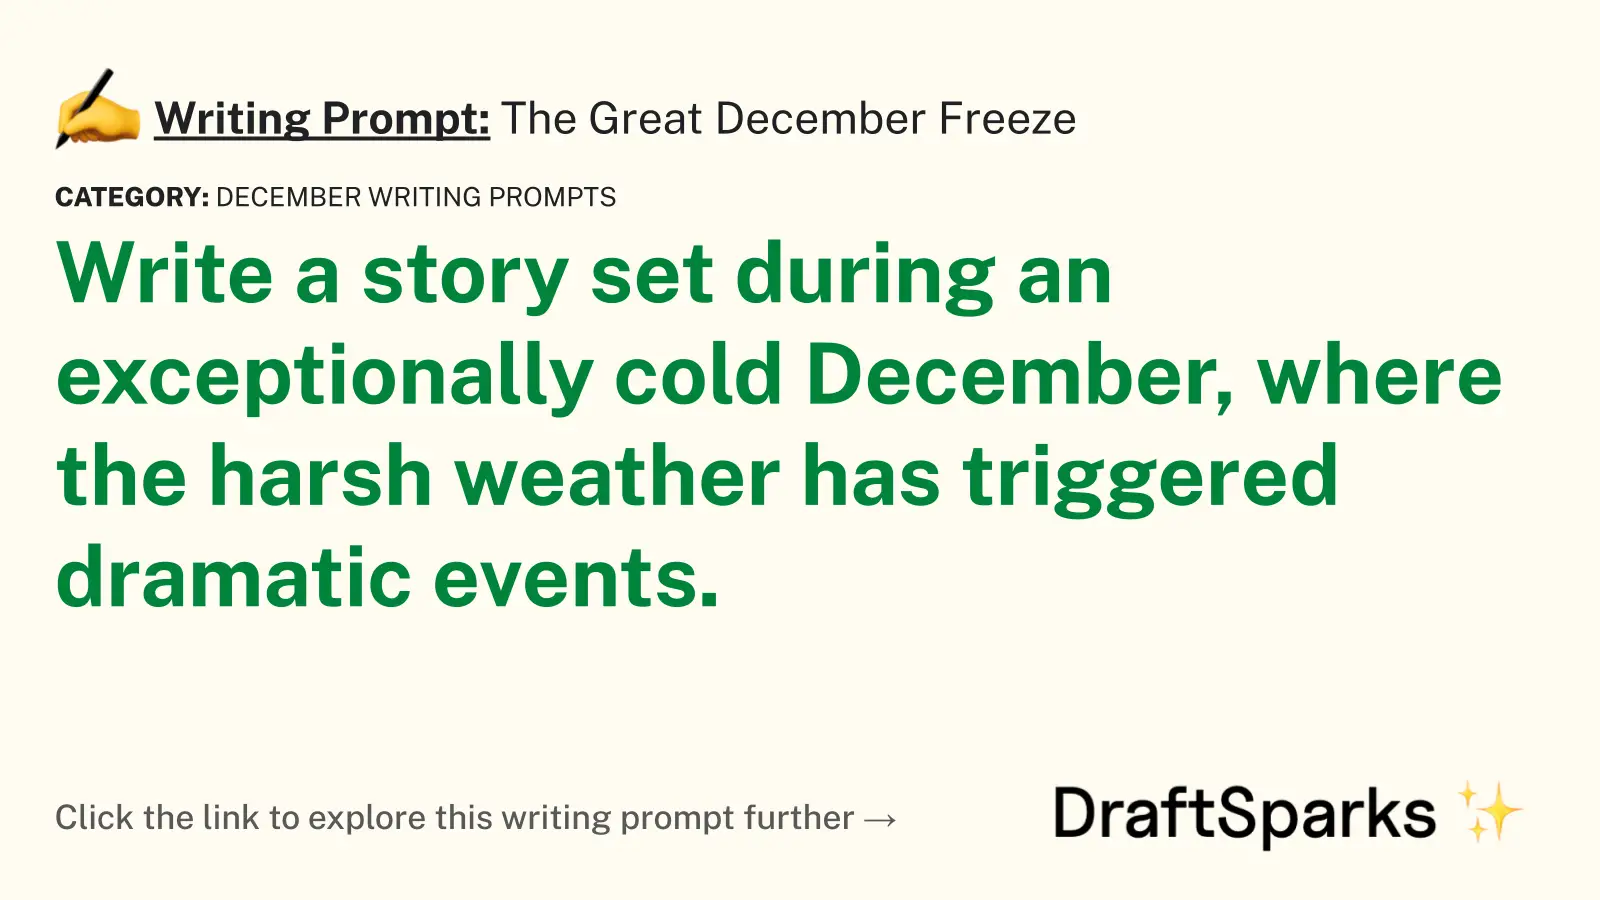 The Great December Freeze